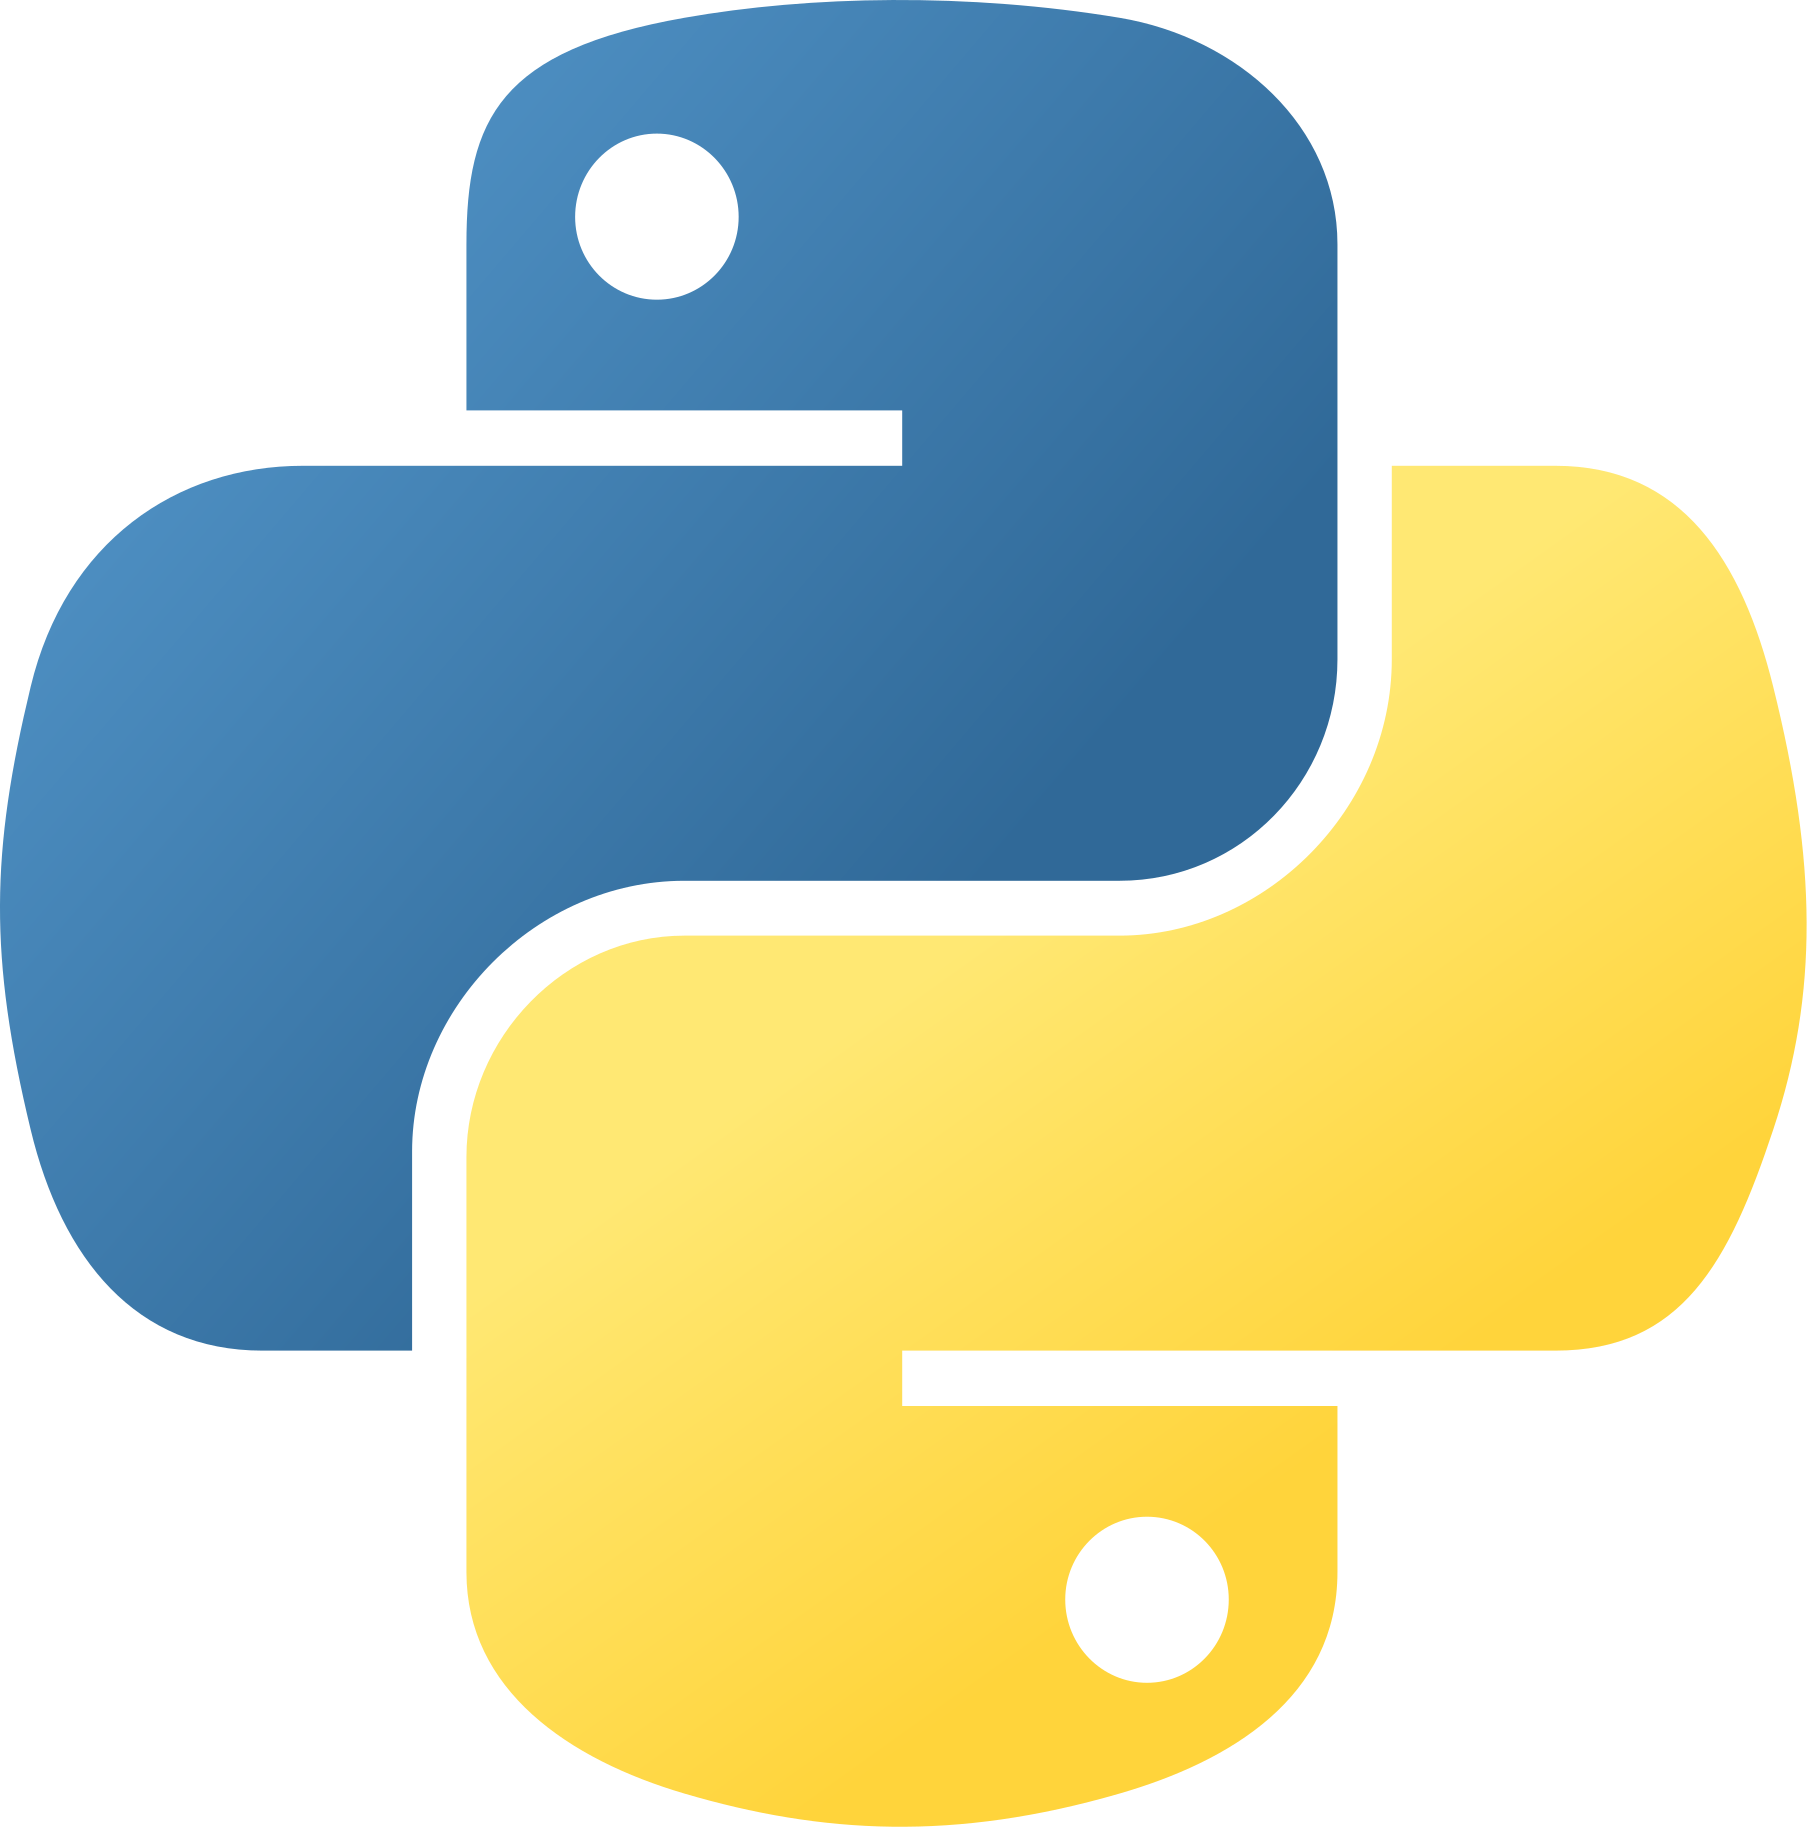 The Python logo, a blue snake and a yellow snake